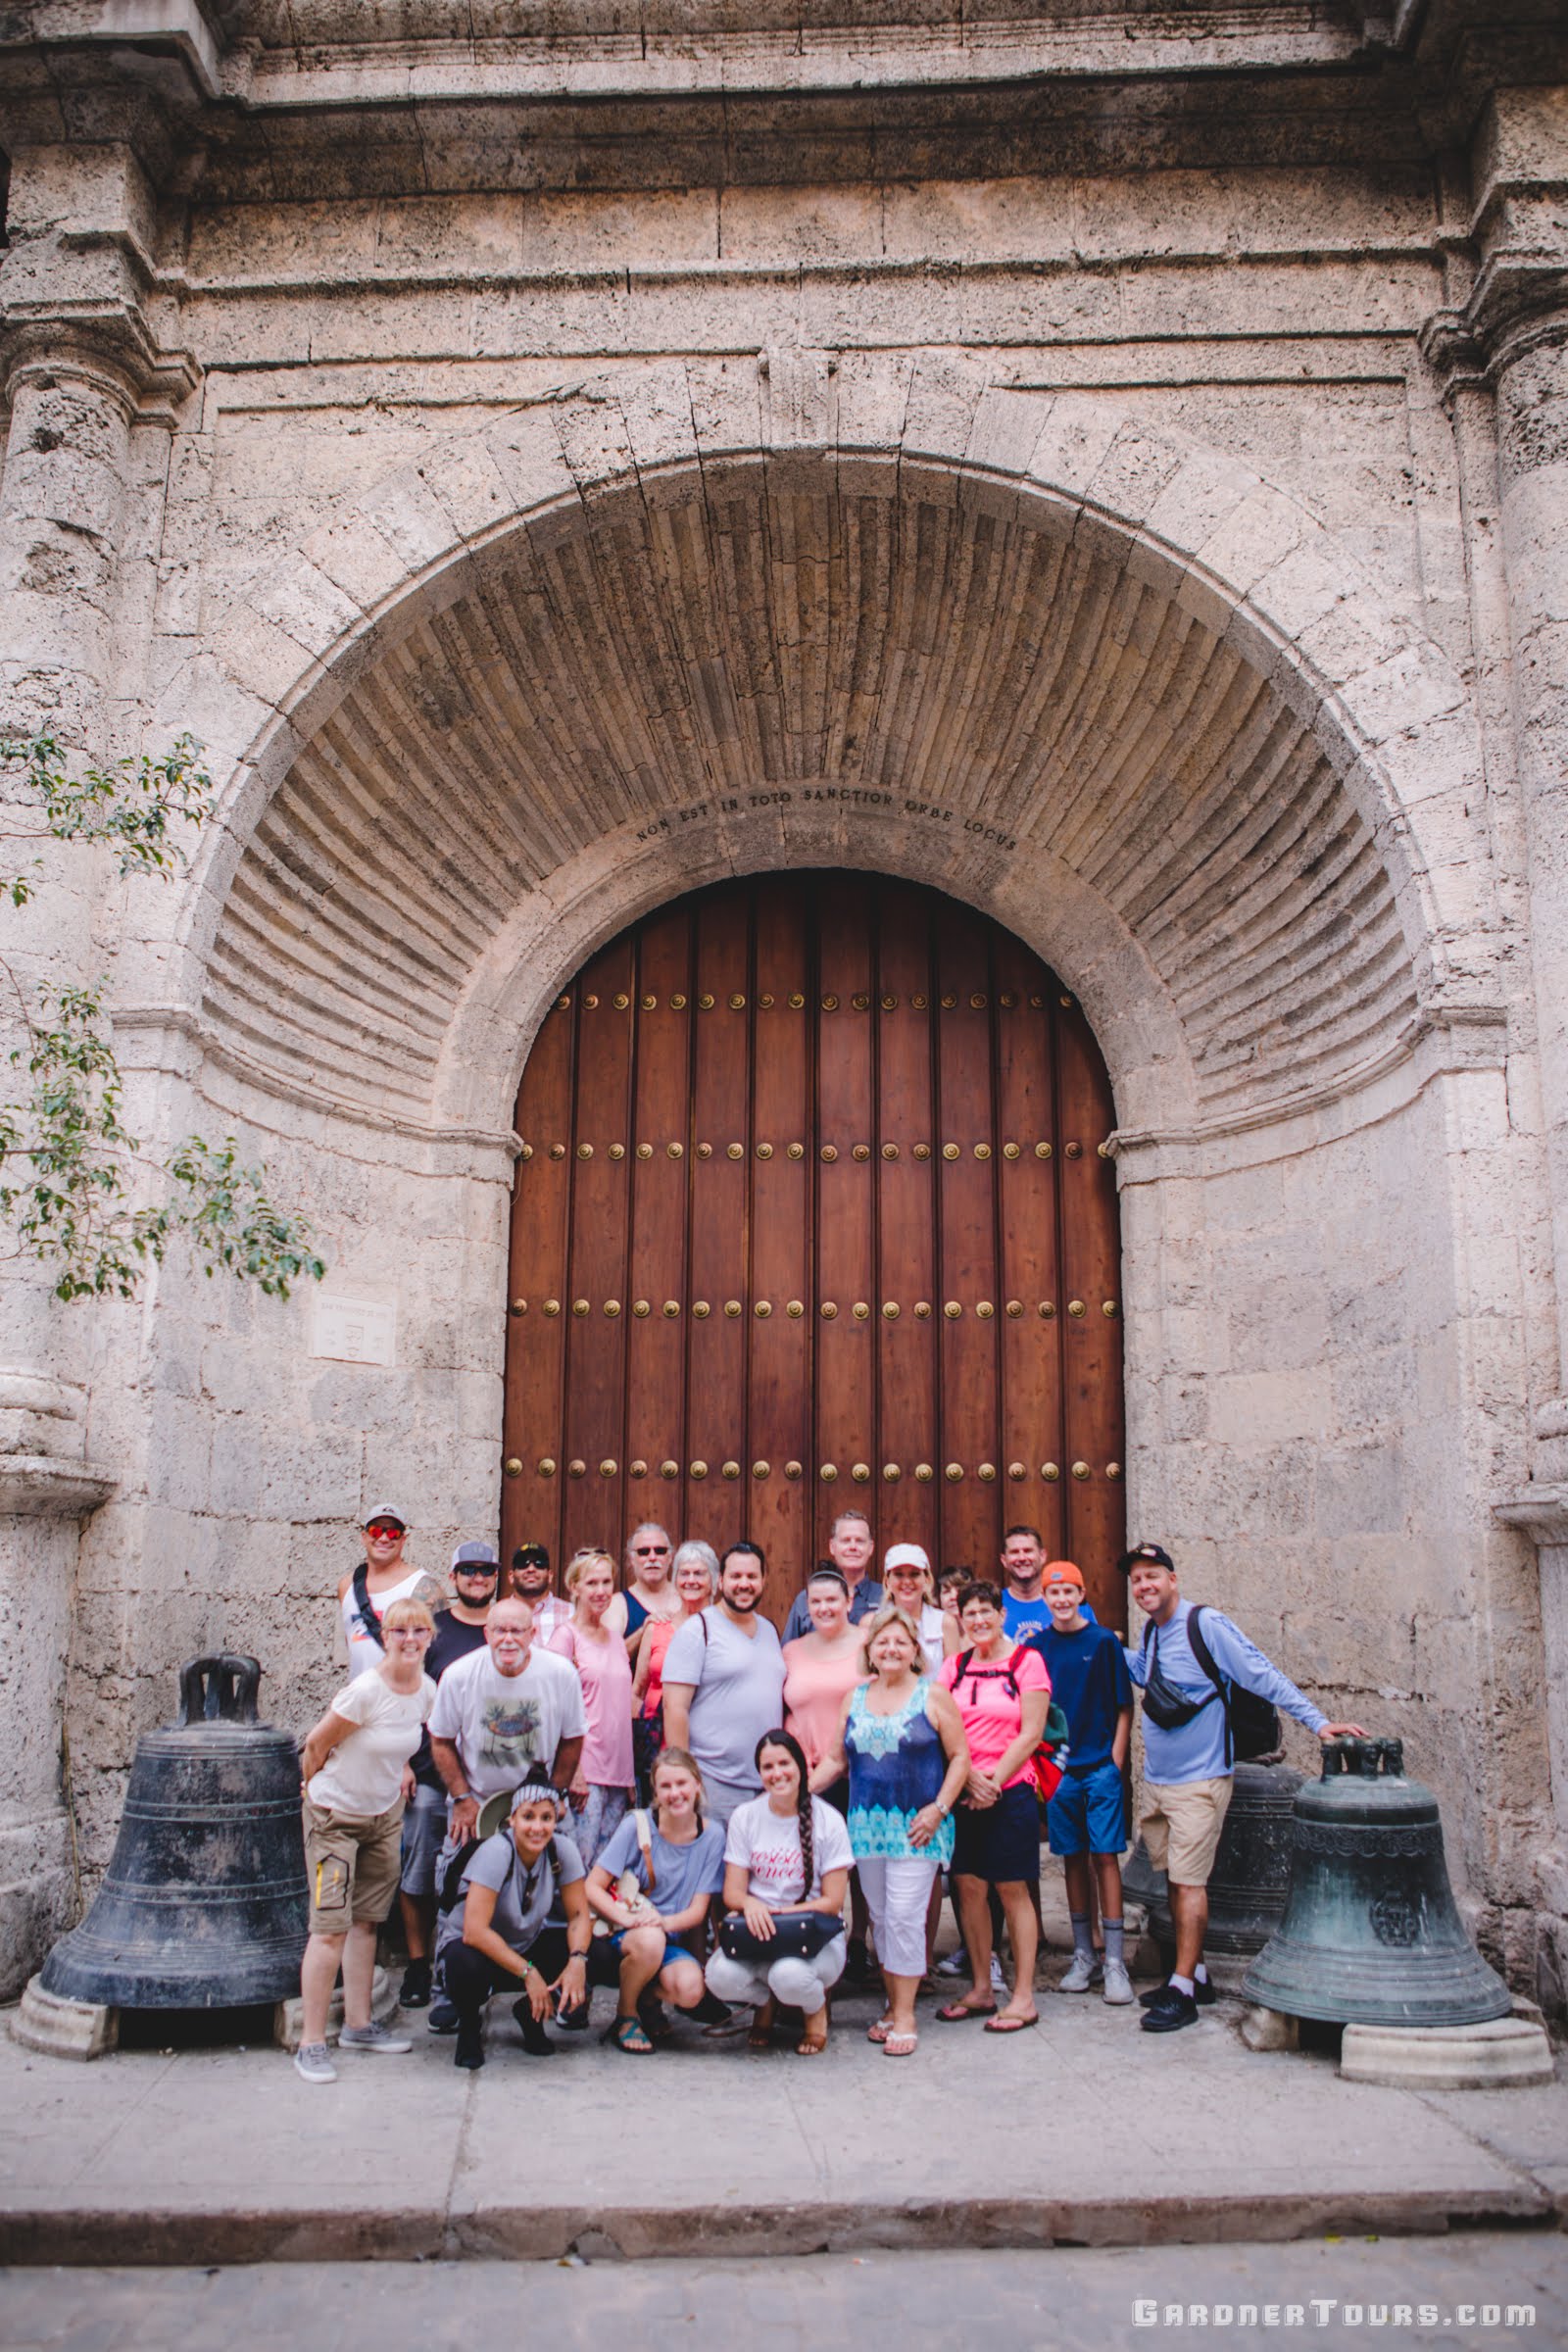 Gardner Tours Cuban Tour Guide Yunior with a large group of travelers from the USA in Old Havana Cuba by the big side door of the Convent of San Francisco de Asis